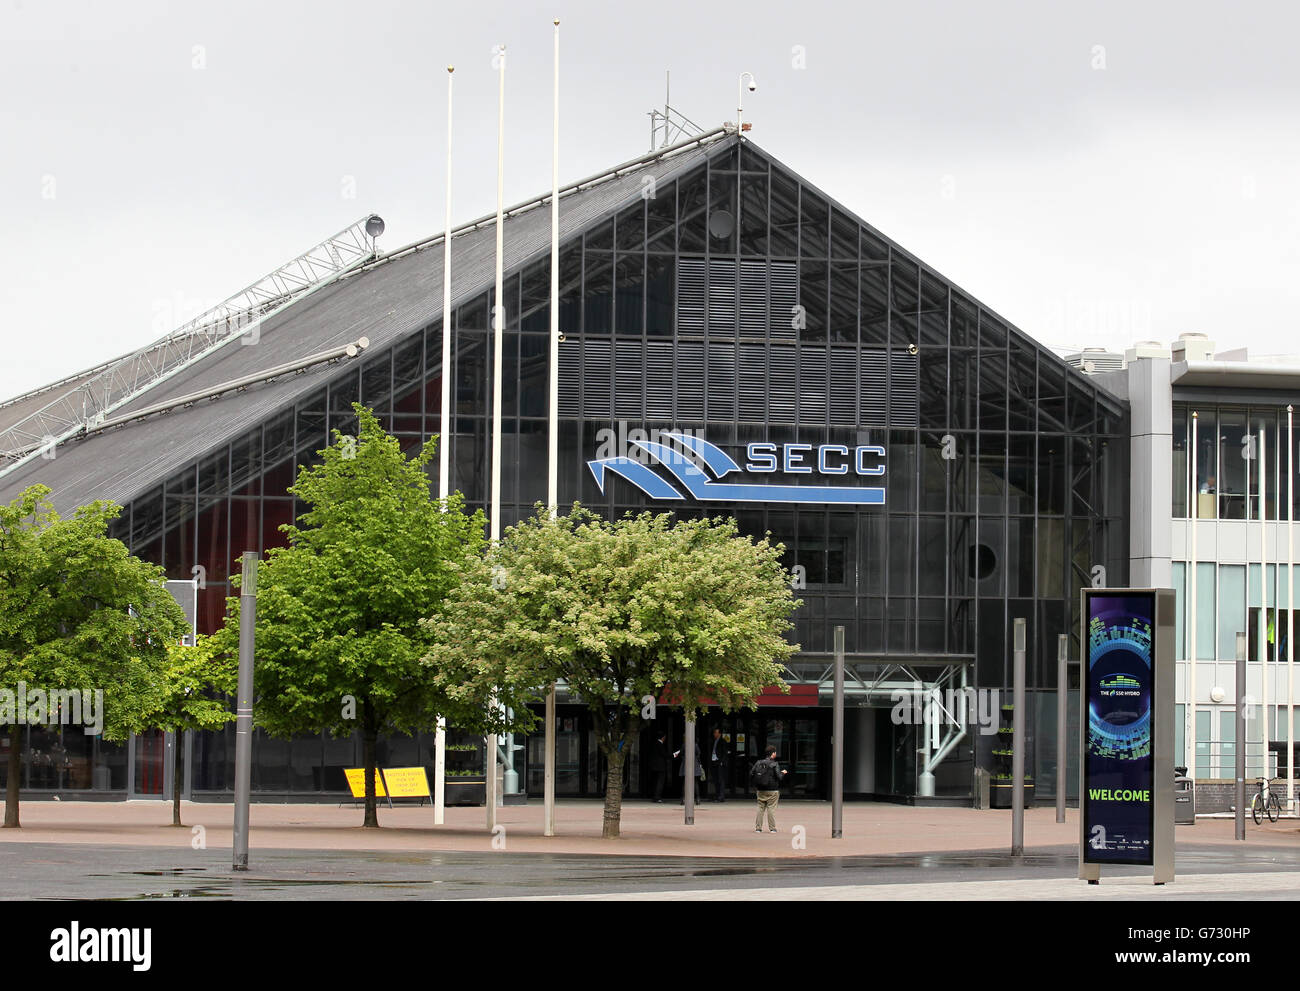 A general view of the SECC in Glasgow which is a Commonwealth Games Venue. PRESS ASSOCIATION Photo. Picture date: Wednesday May 28, 2014. See PA story SPORT Scotland. Photo credit should read: Andrew Milligan/PA Wire Stock Photo